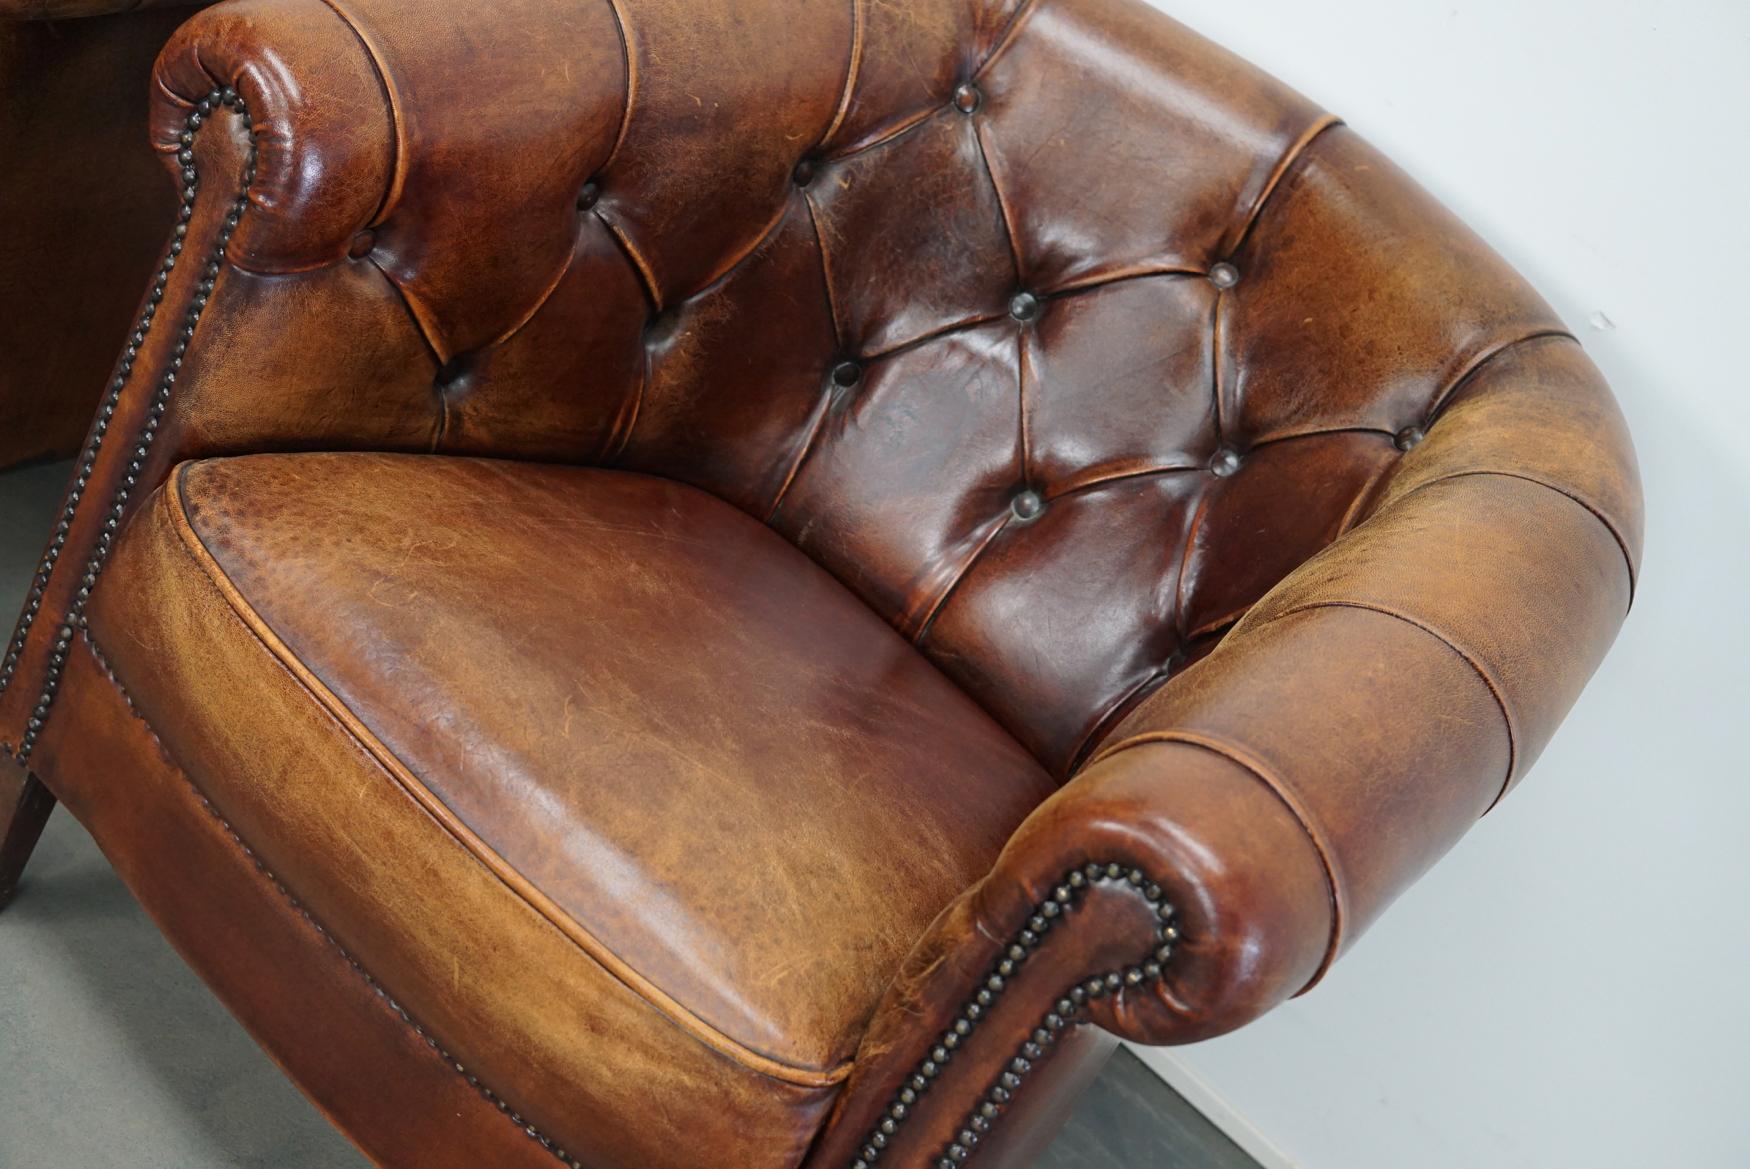 Vintage Dutch Chesterfield Cognac Leather Club Chairs, Set of 2 5